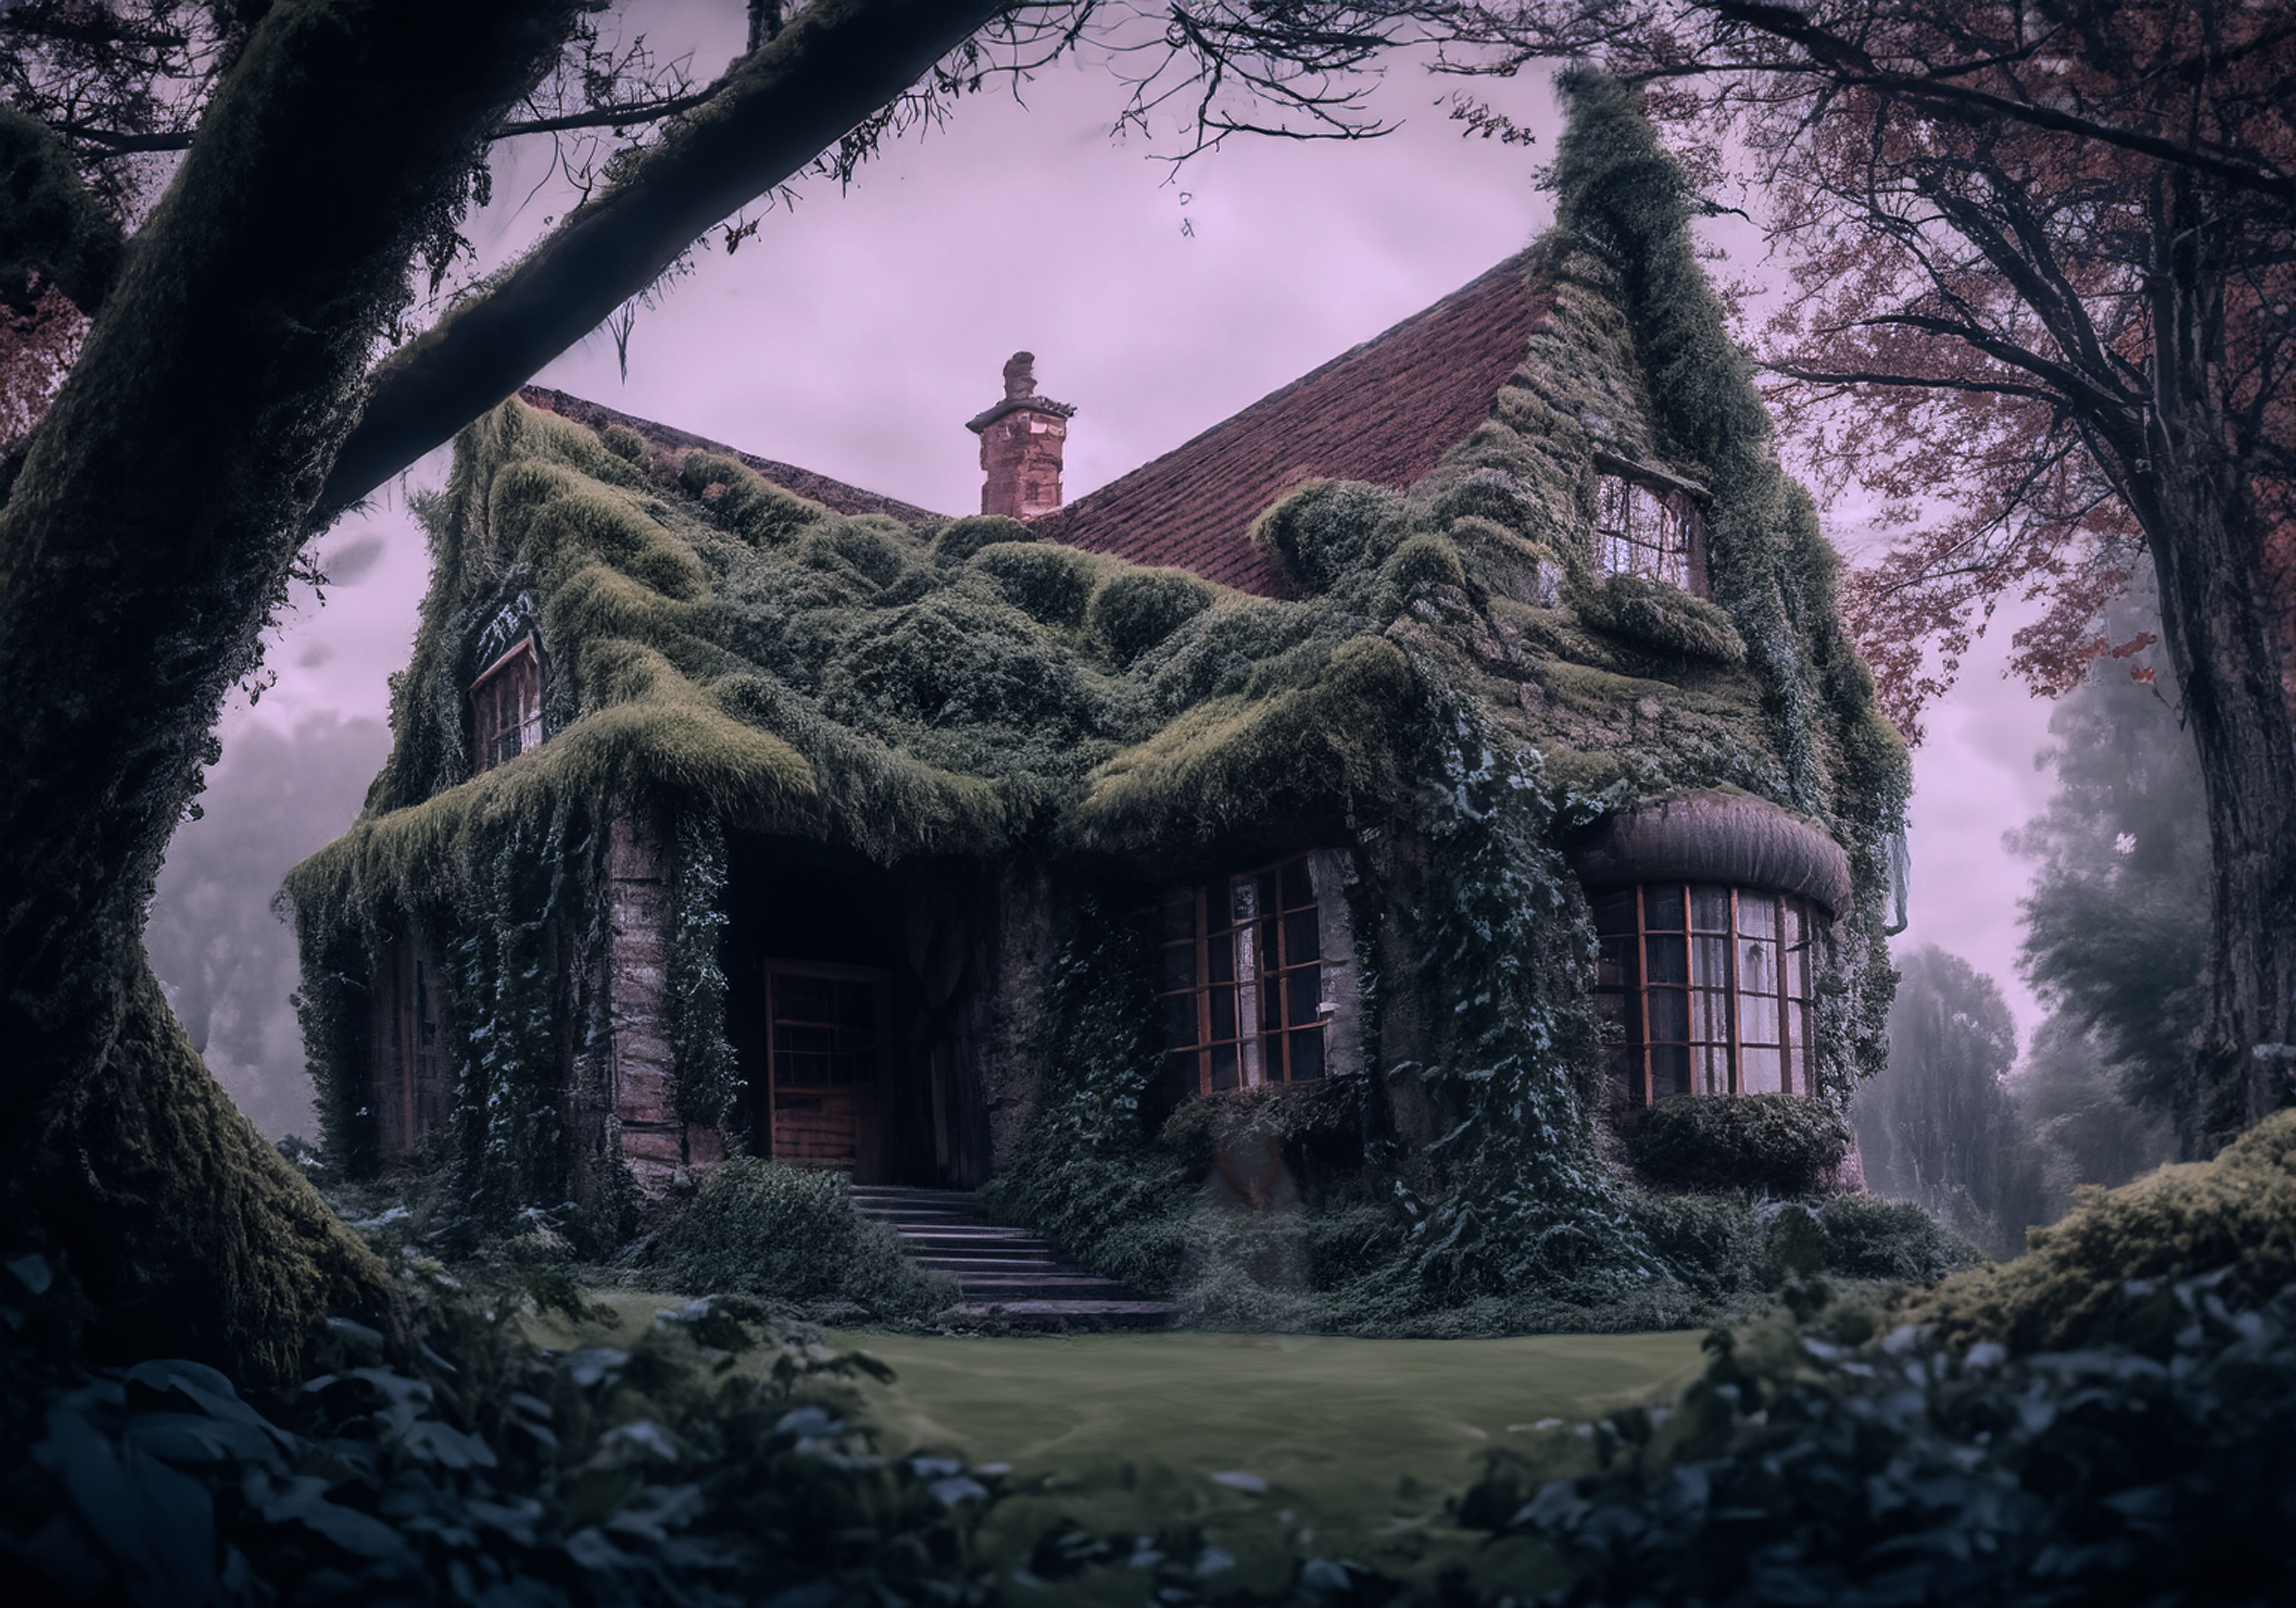 An image of an overgrown cottage. It is misty in the background and is well hidden. There is a small ghostly girl, barely visible, in front of the disregarded home.